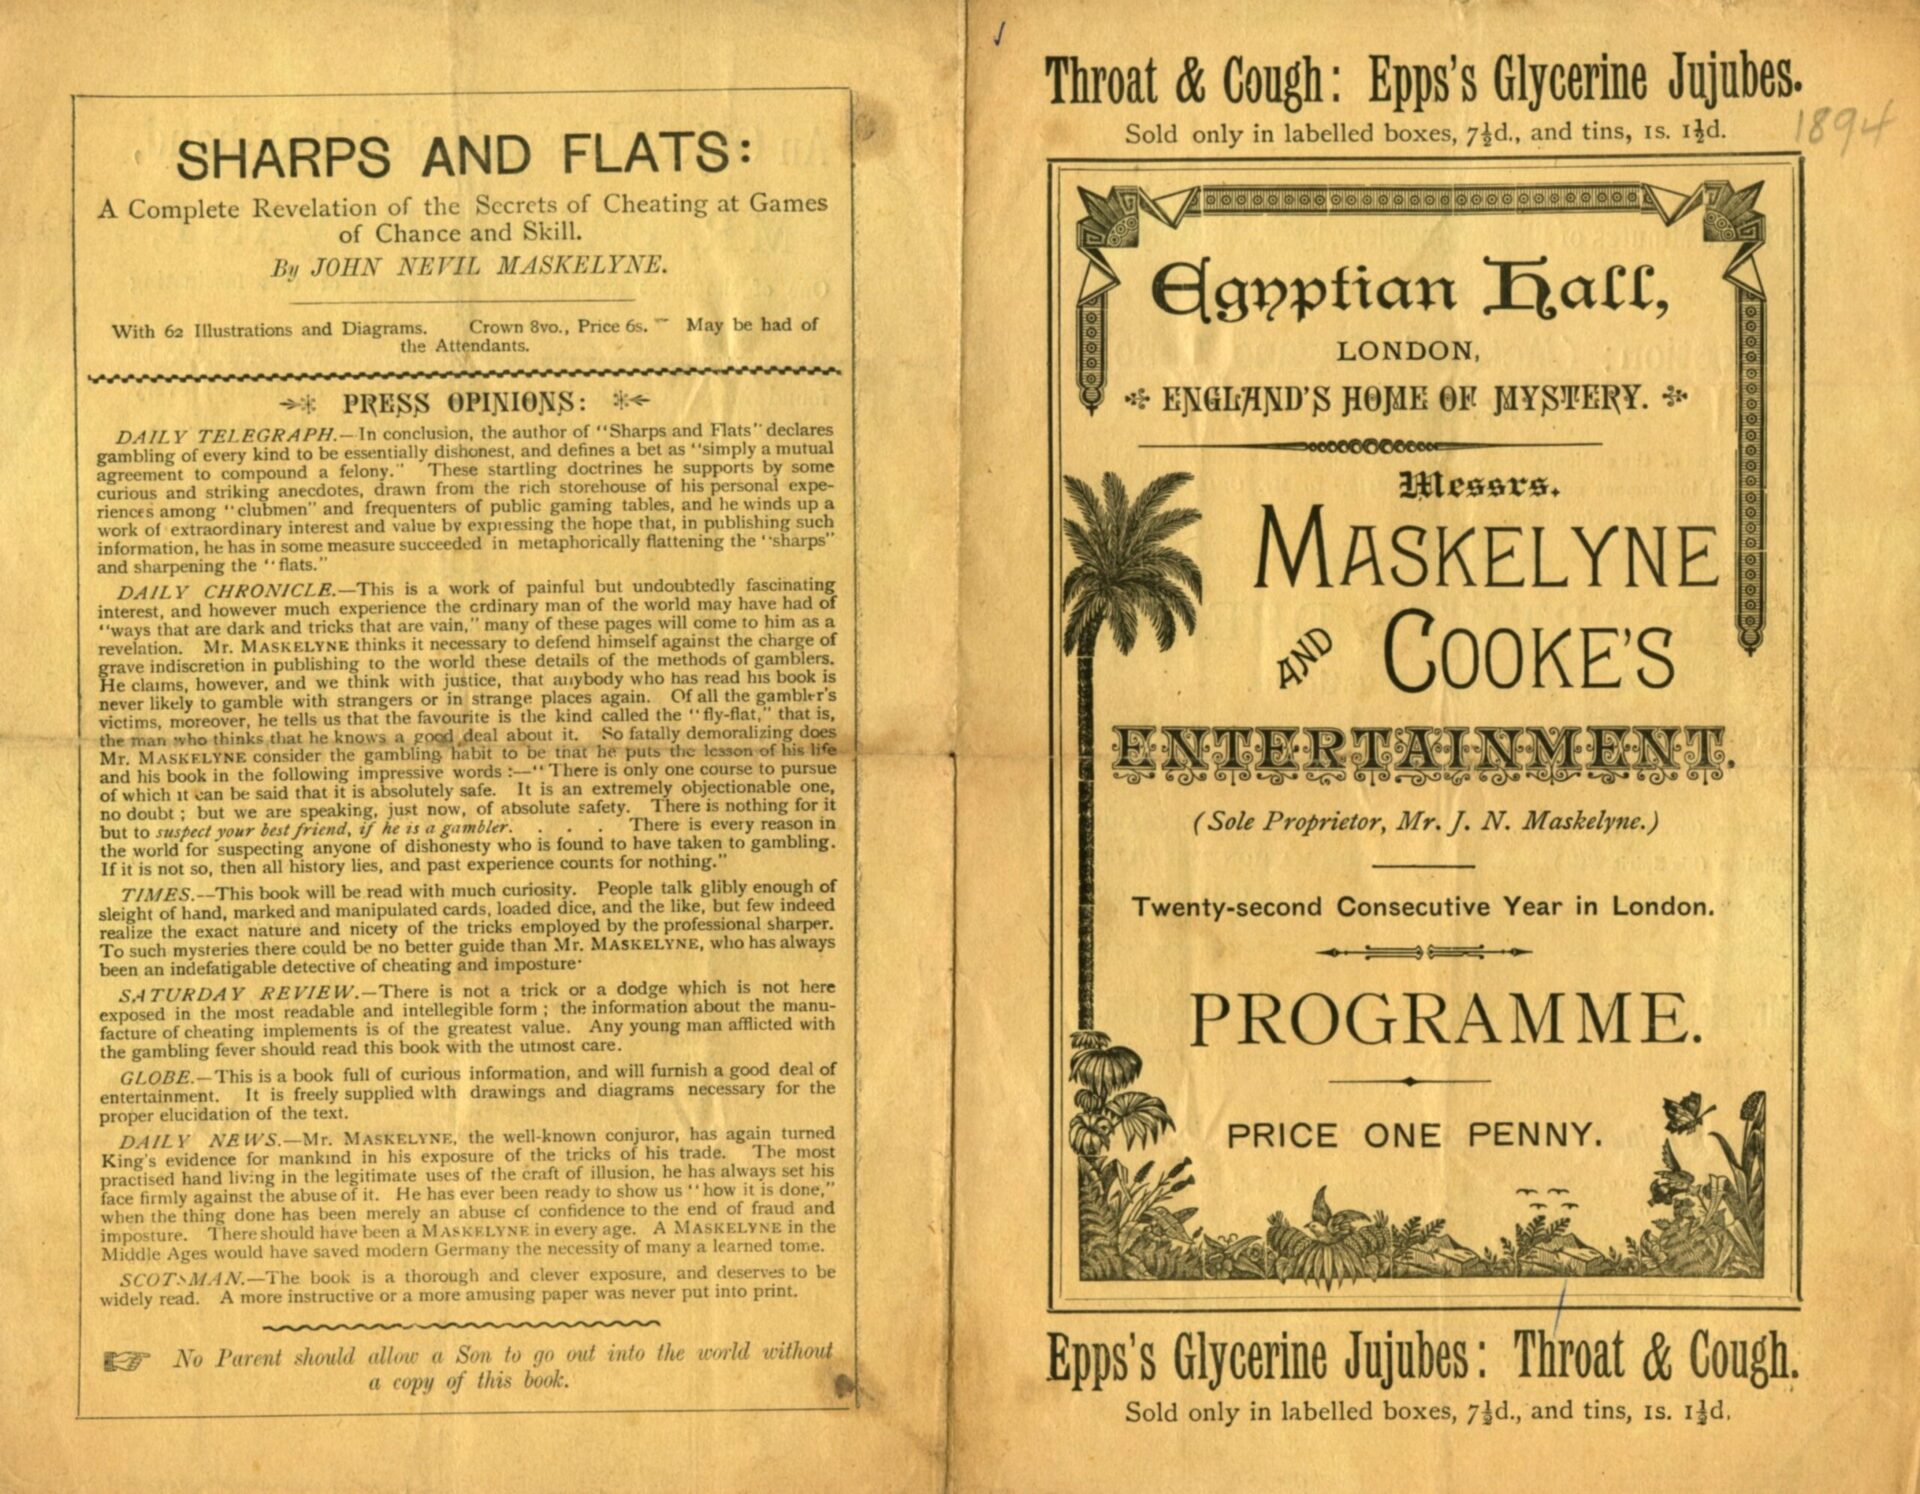 Maskelyne and Cooke programme for the Egyptian Hall, 22nd consecutive year